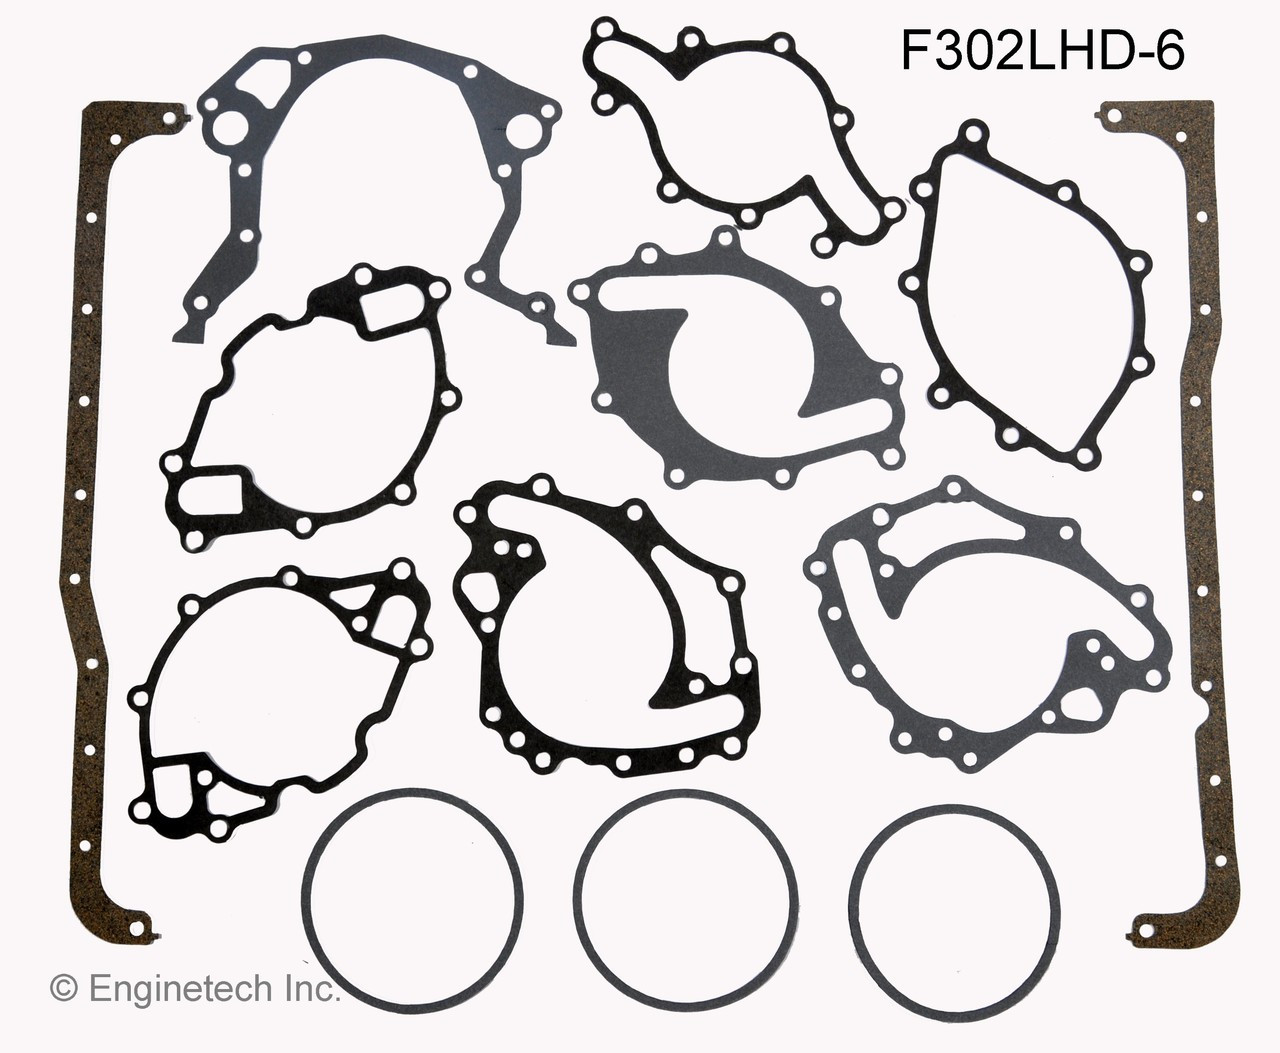 1987 Ford Mustang 5.0L Engine Gasket Set F302LHD-6 -34